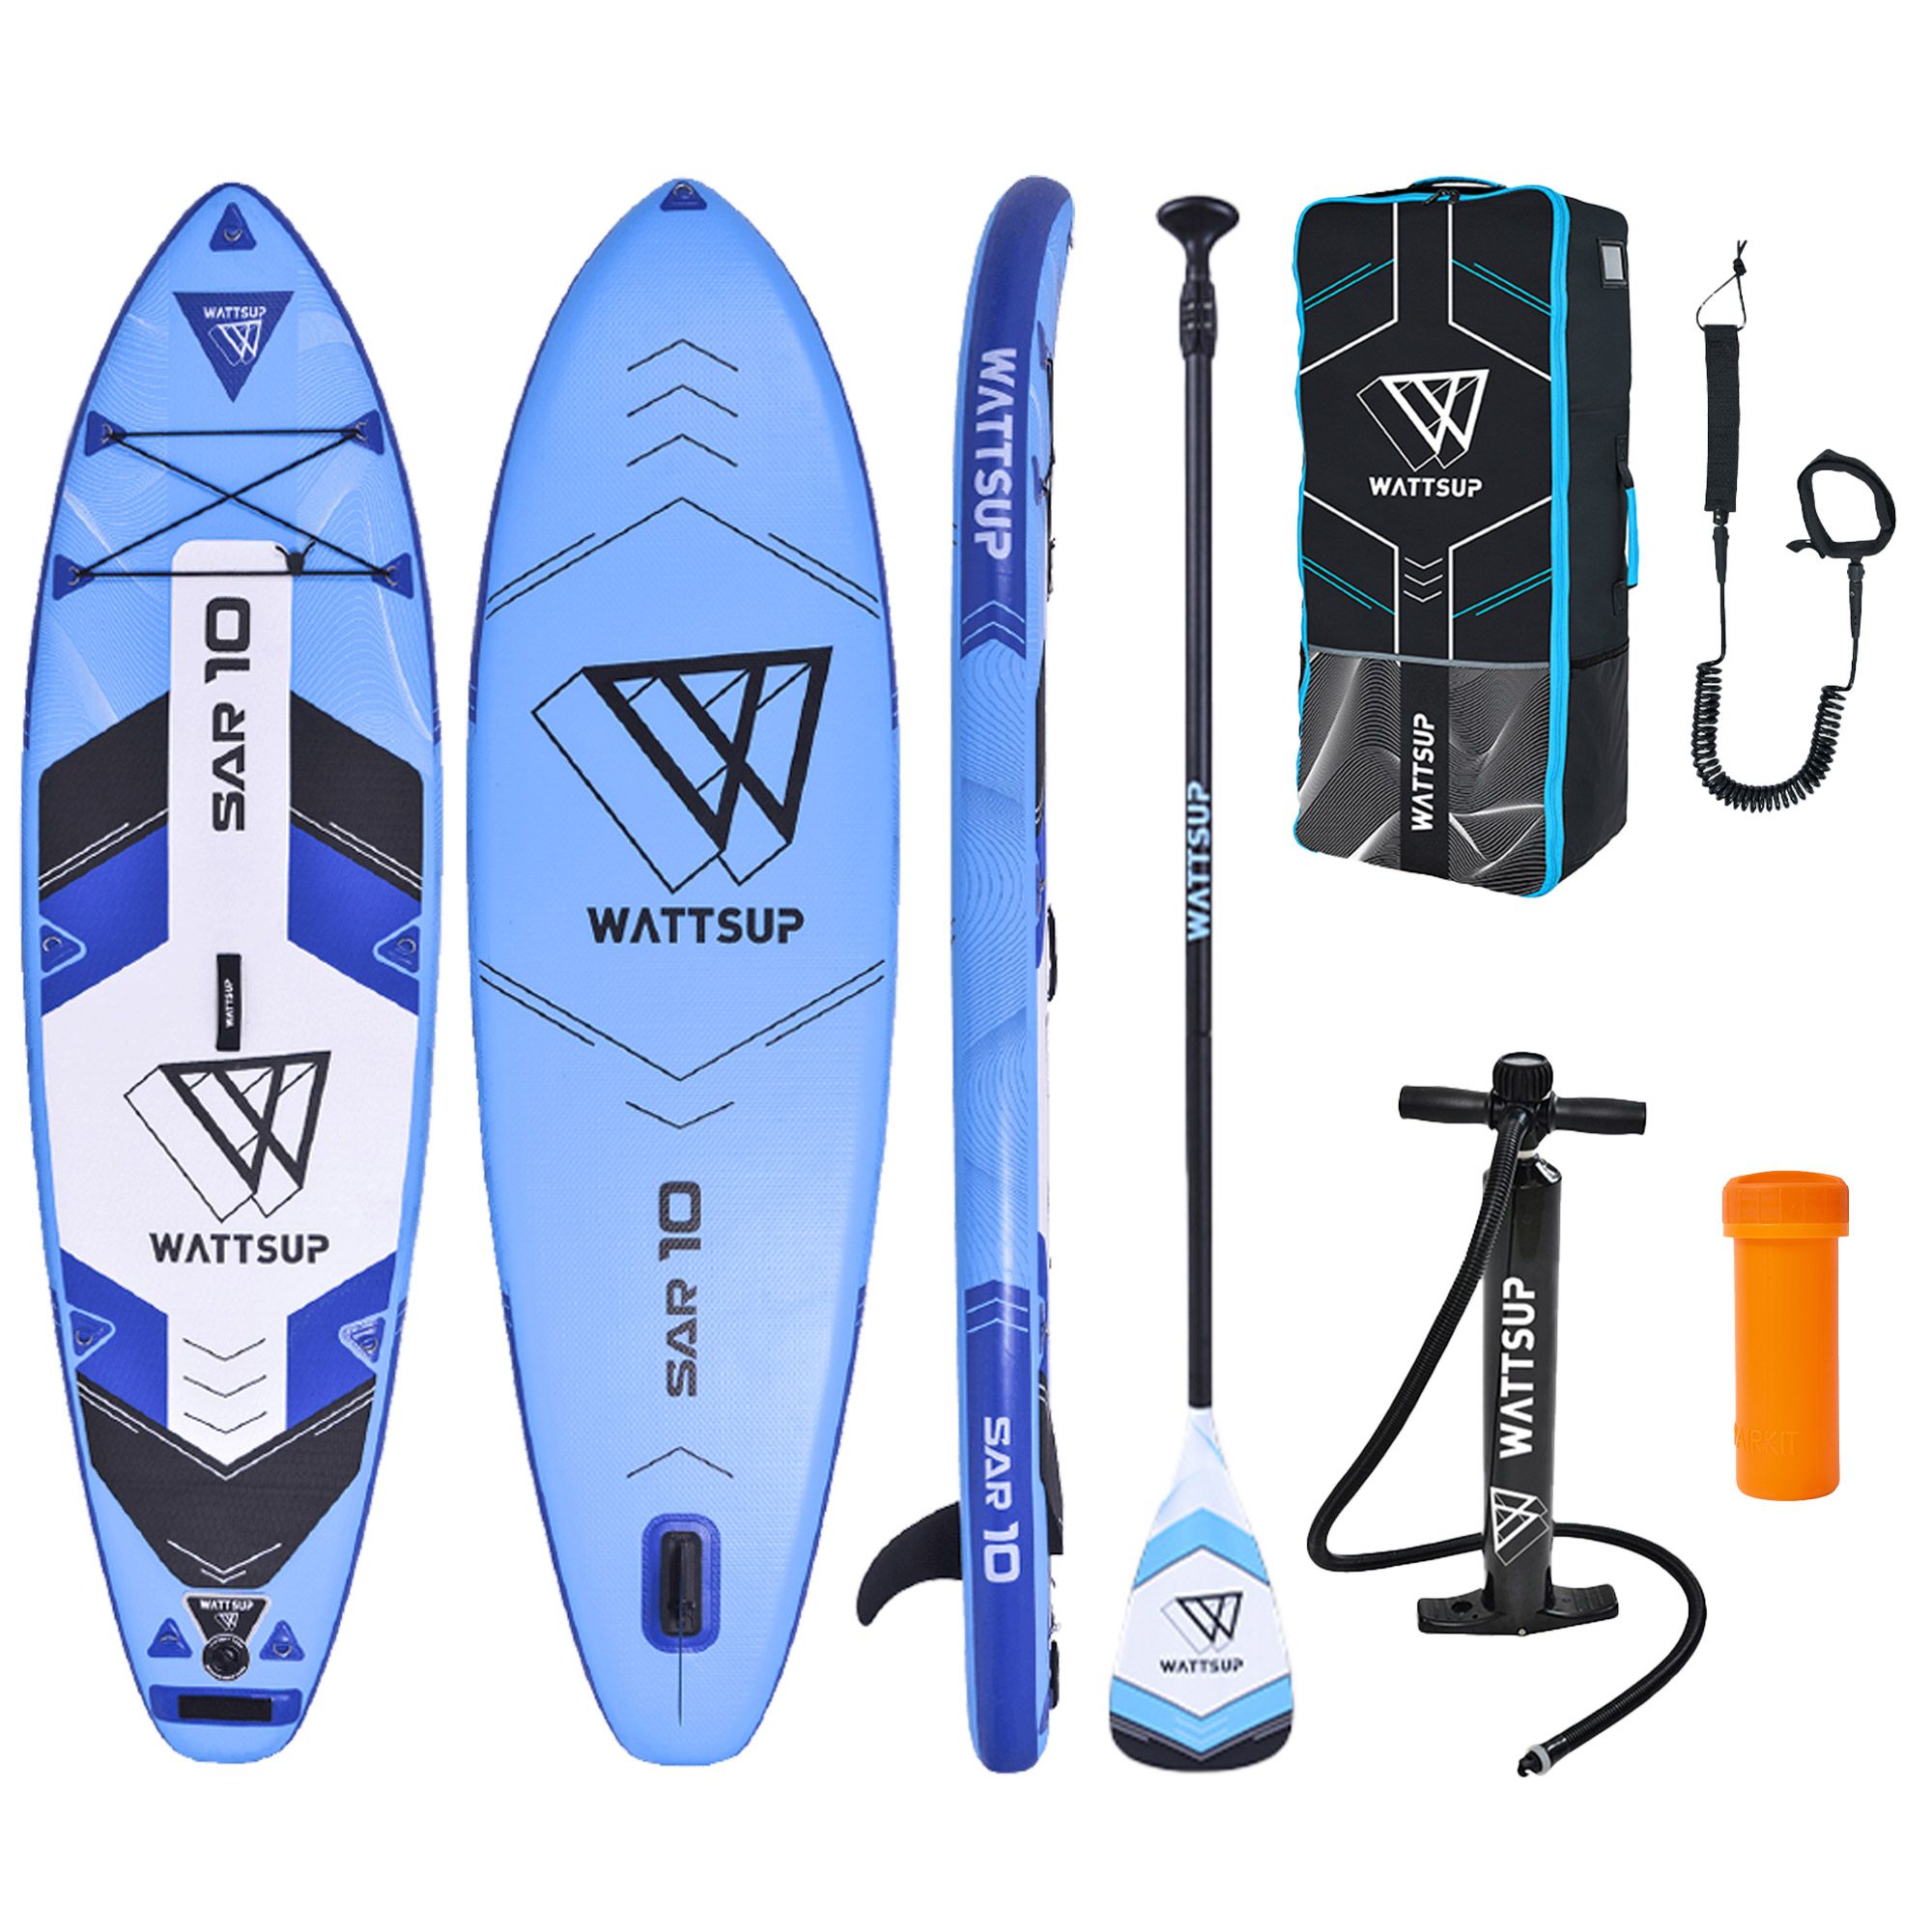 Stand Up Paddle Sup Tabla Inflable Con Accesorios - Sar 10 - azul - 